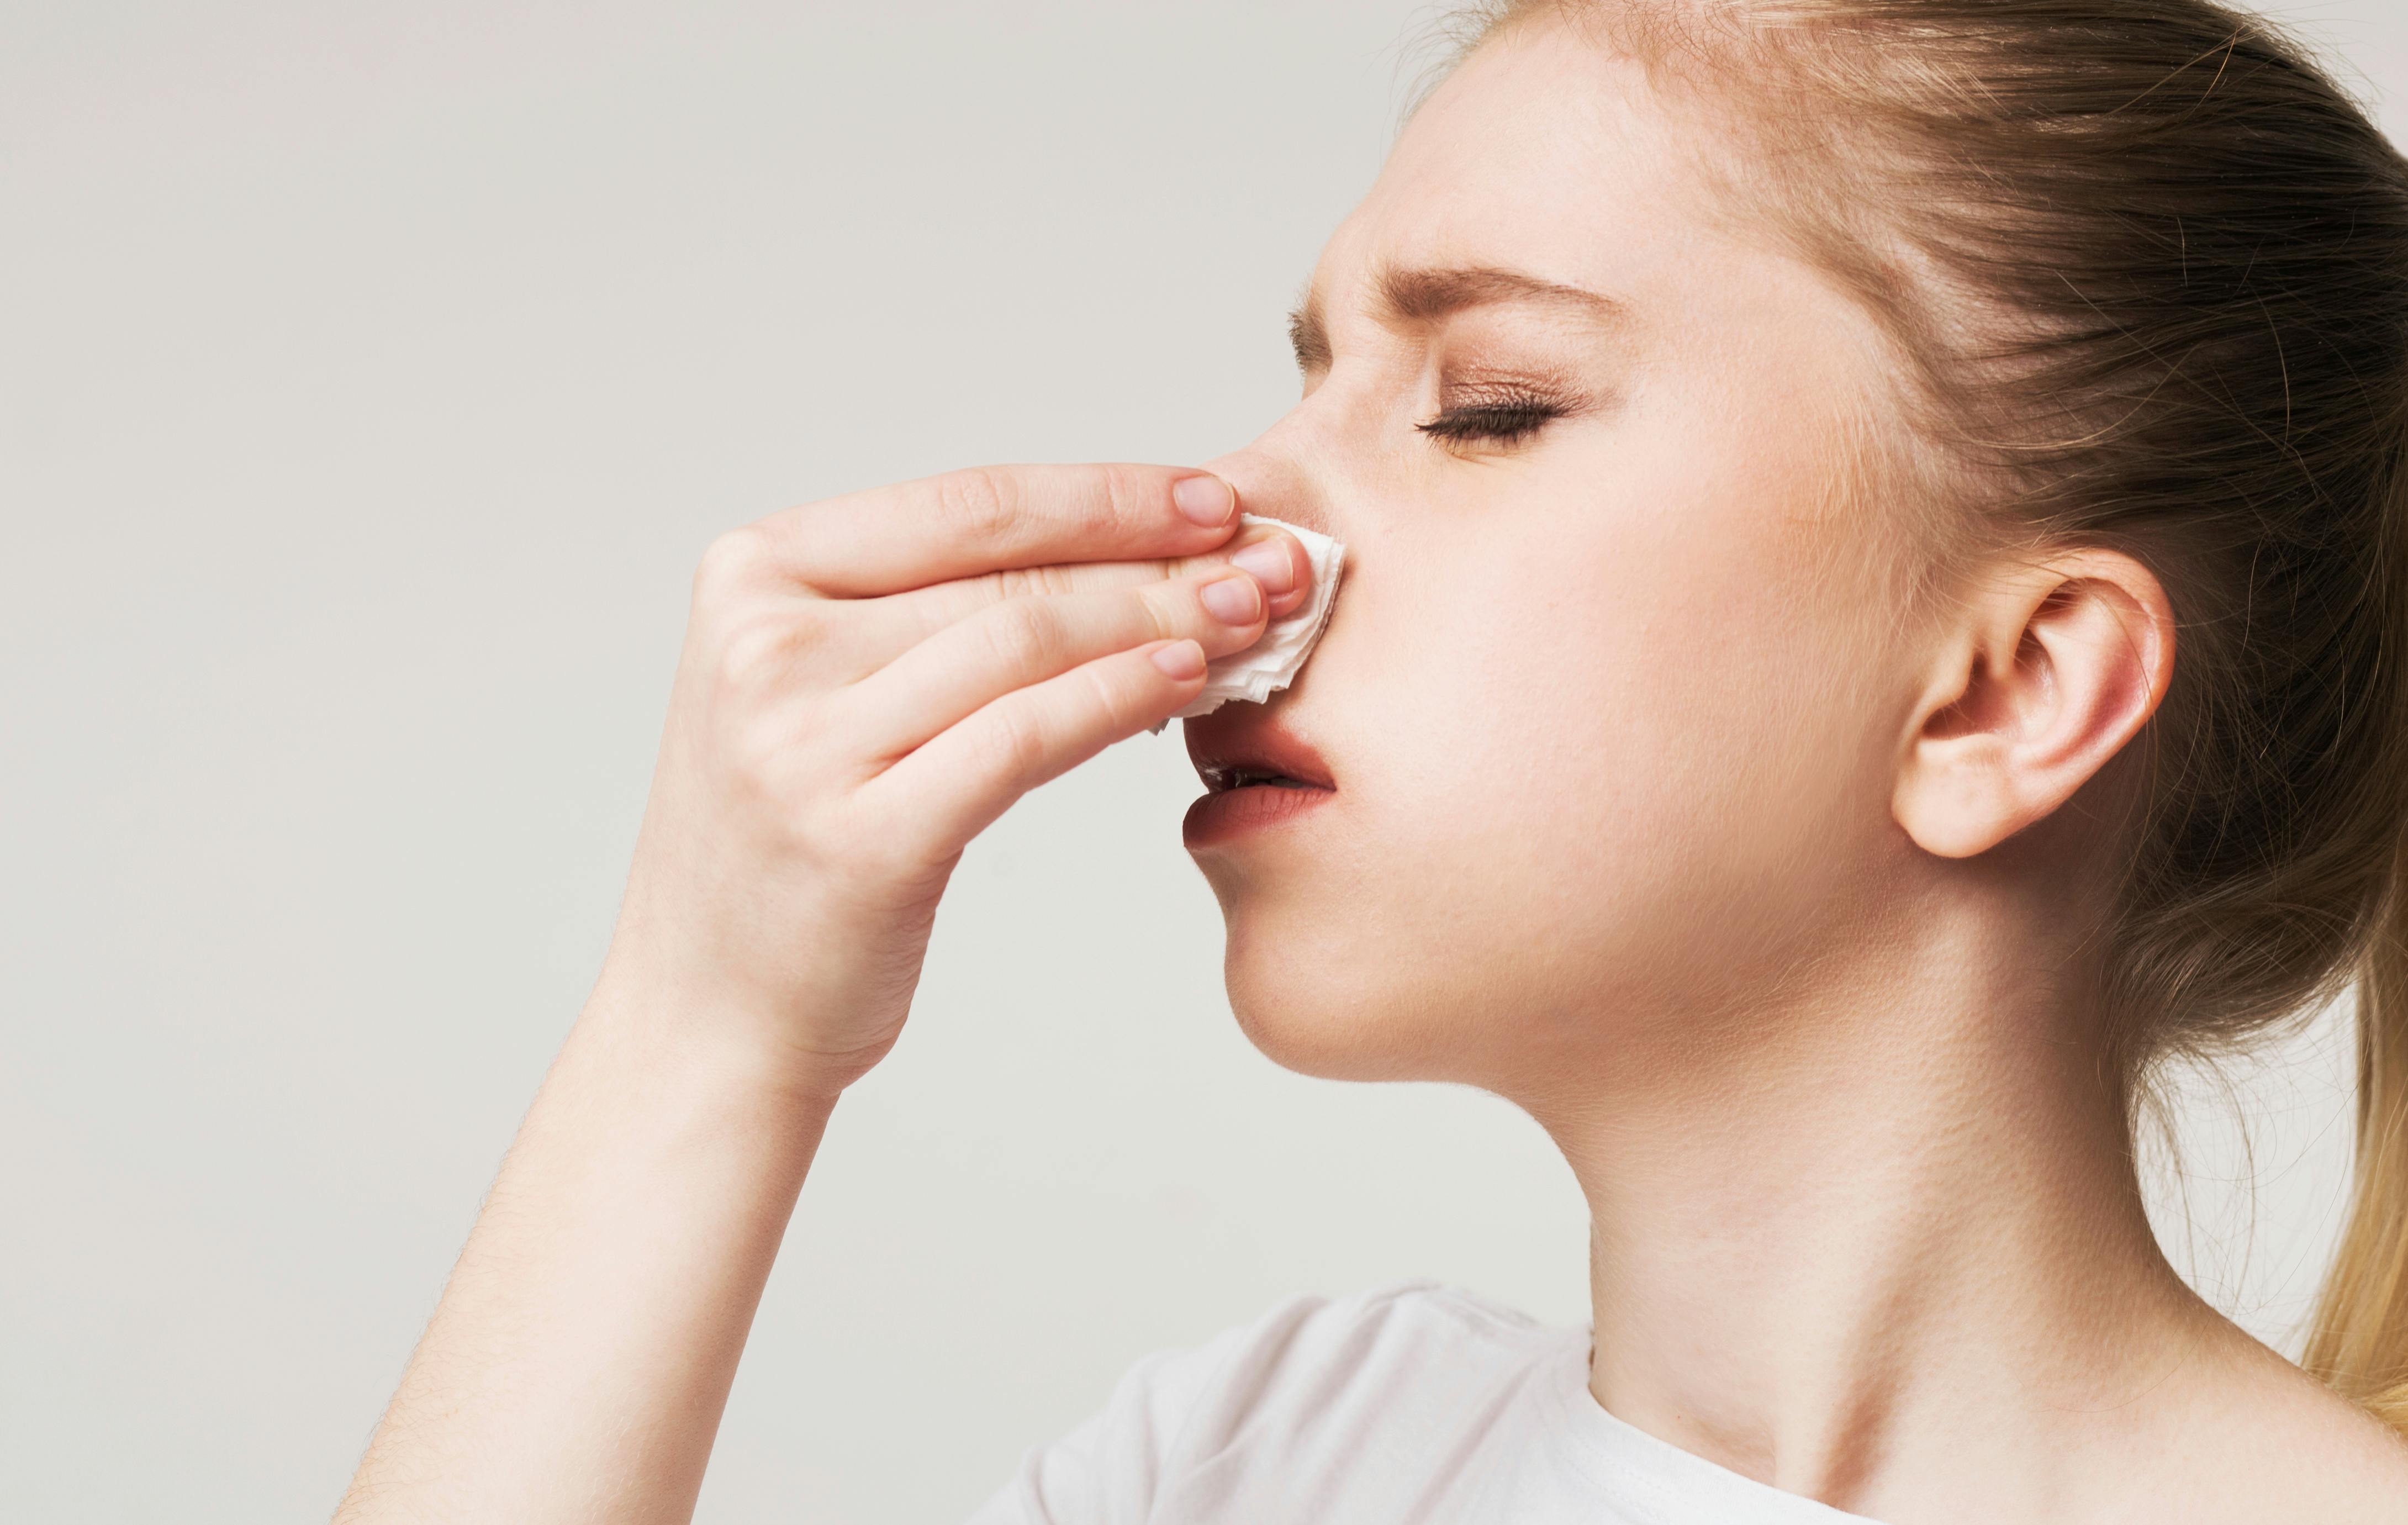 Young woman blowing her nose due to allergies 